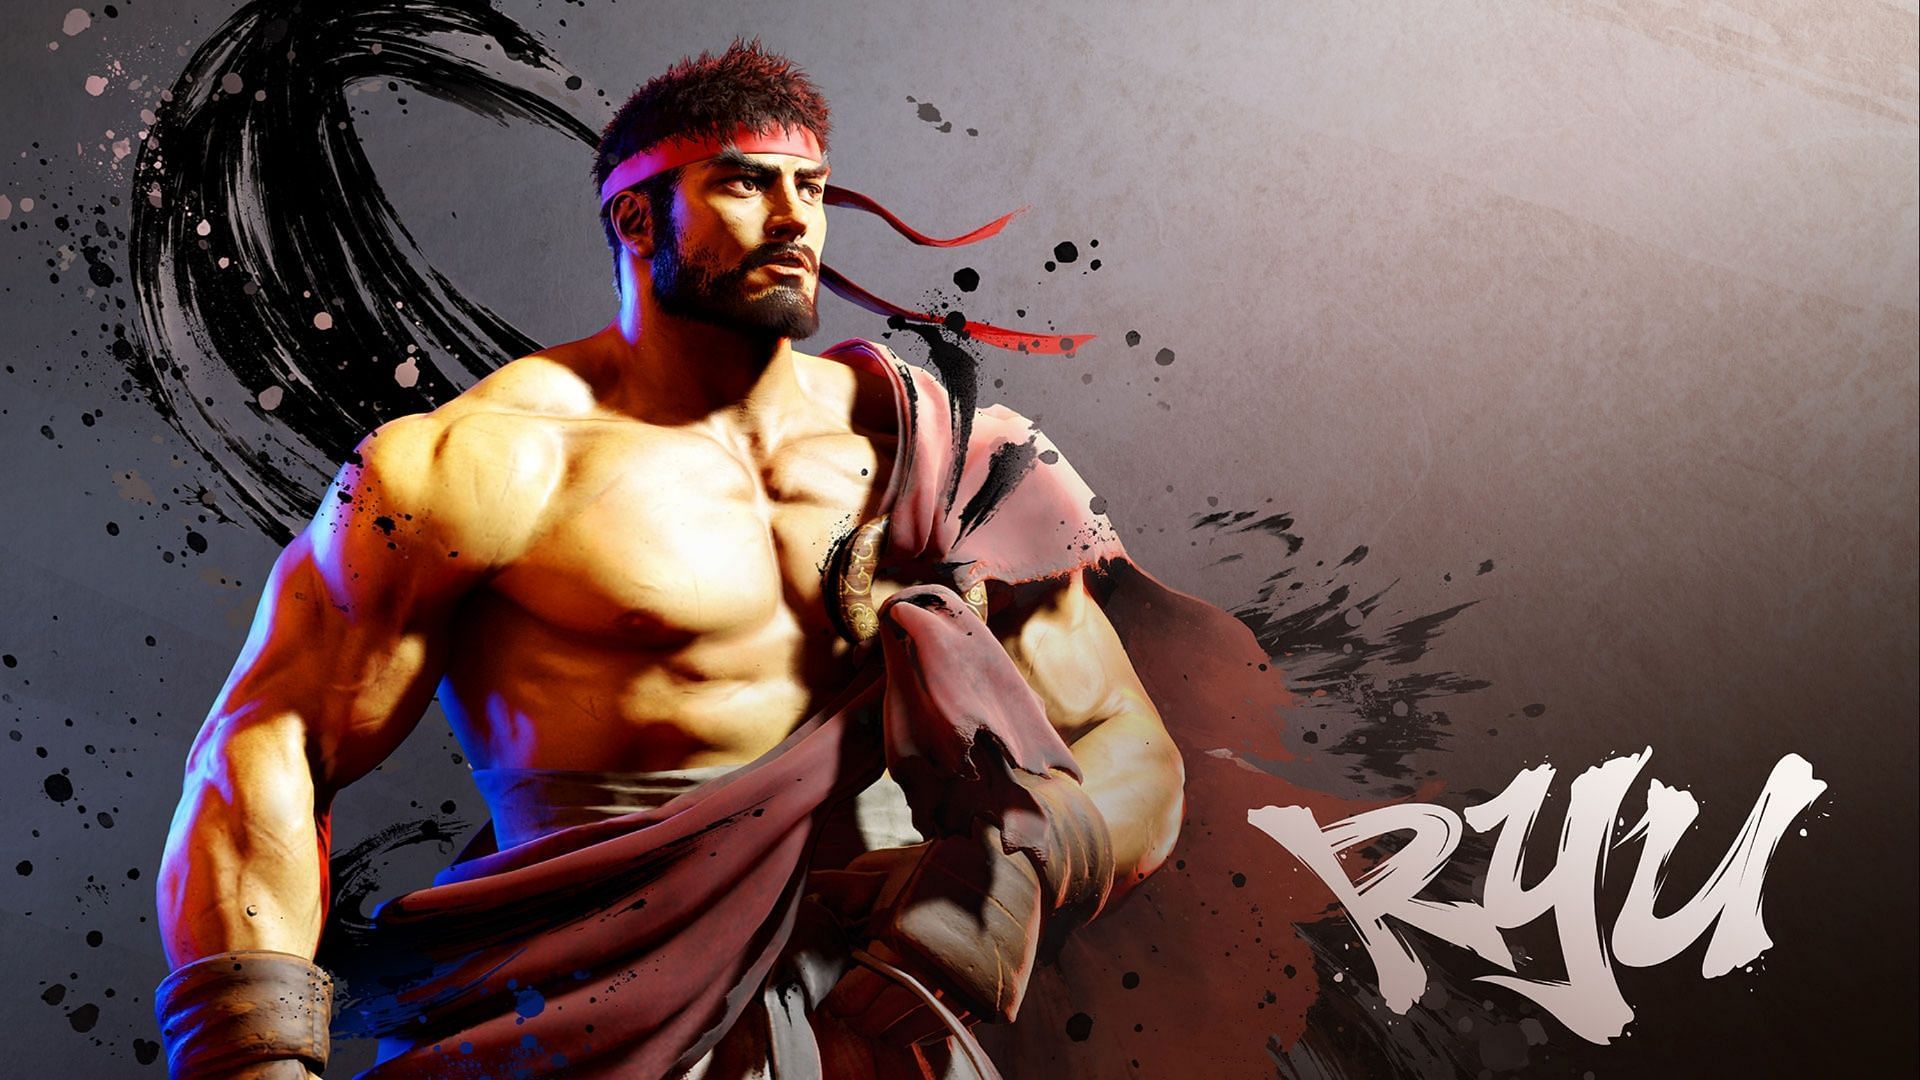 Ryu: Street Fighter 6 Ryu complete combo guide - BnB, Drive, Punish  Counters, and more